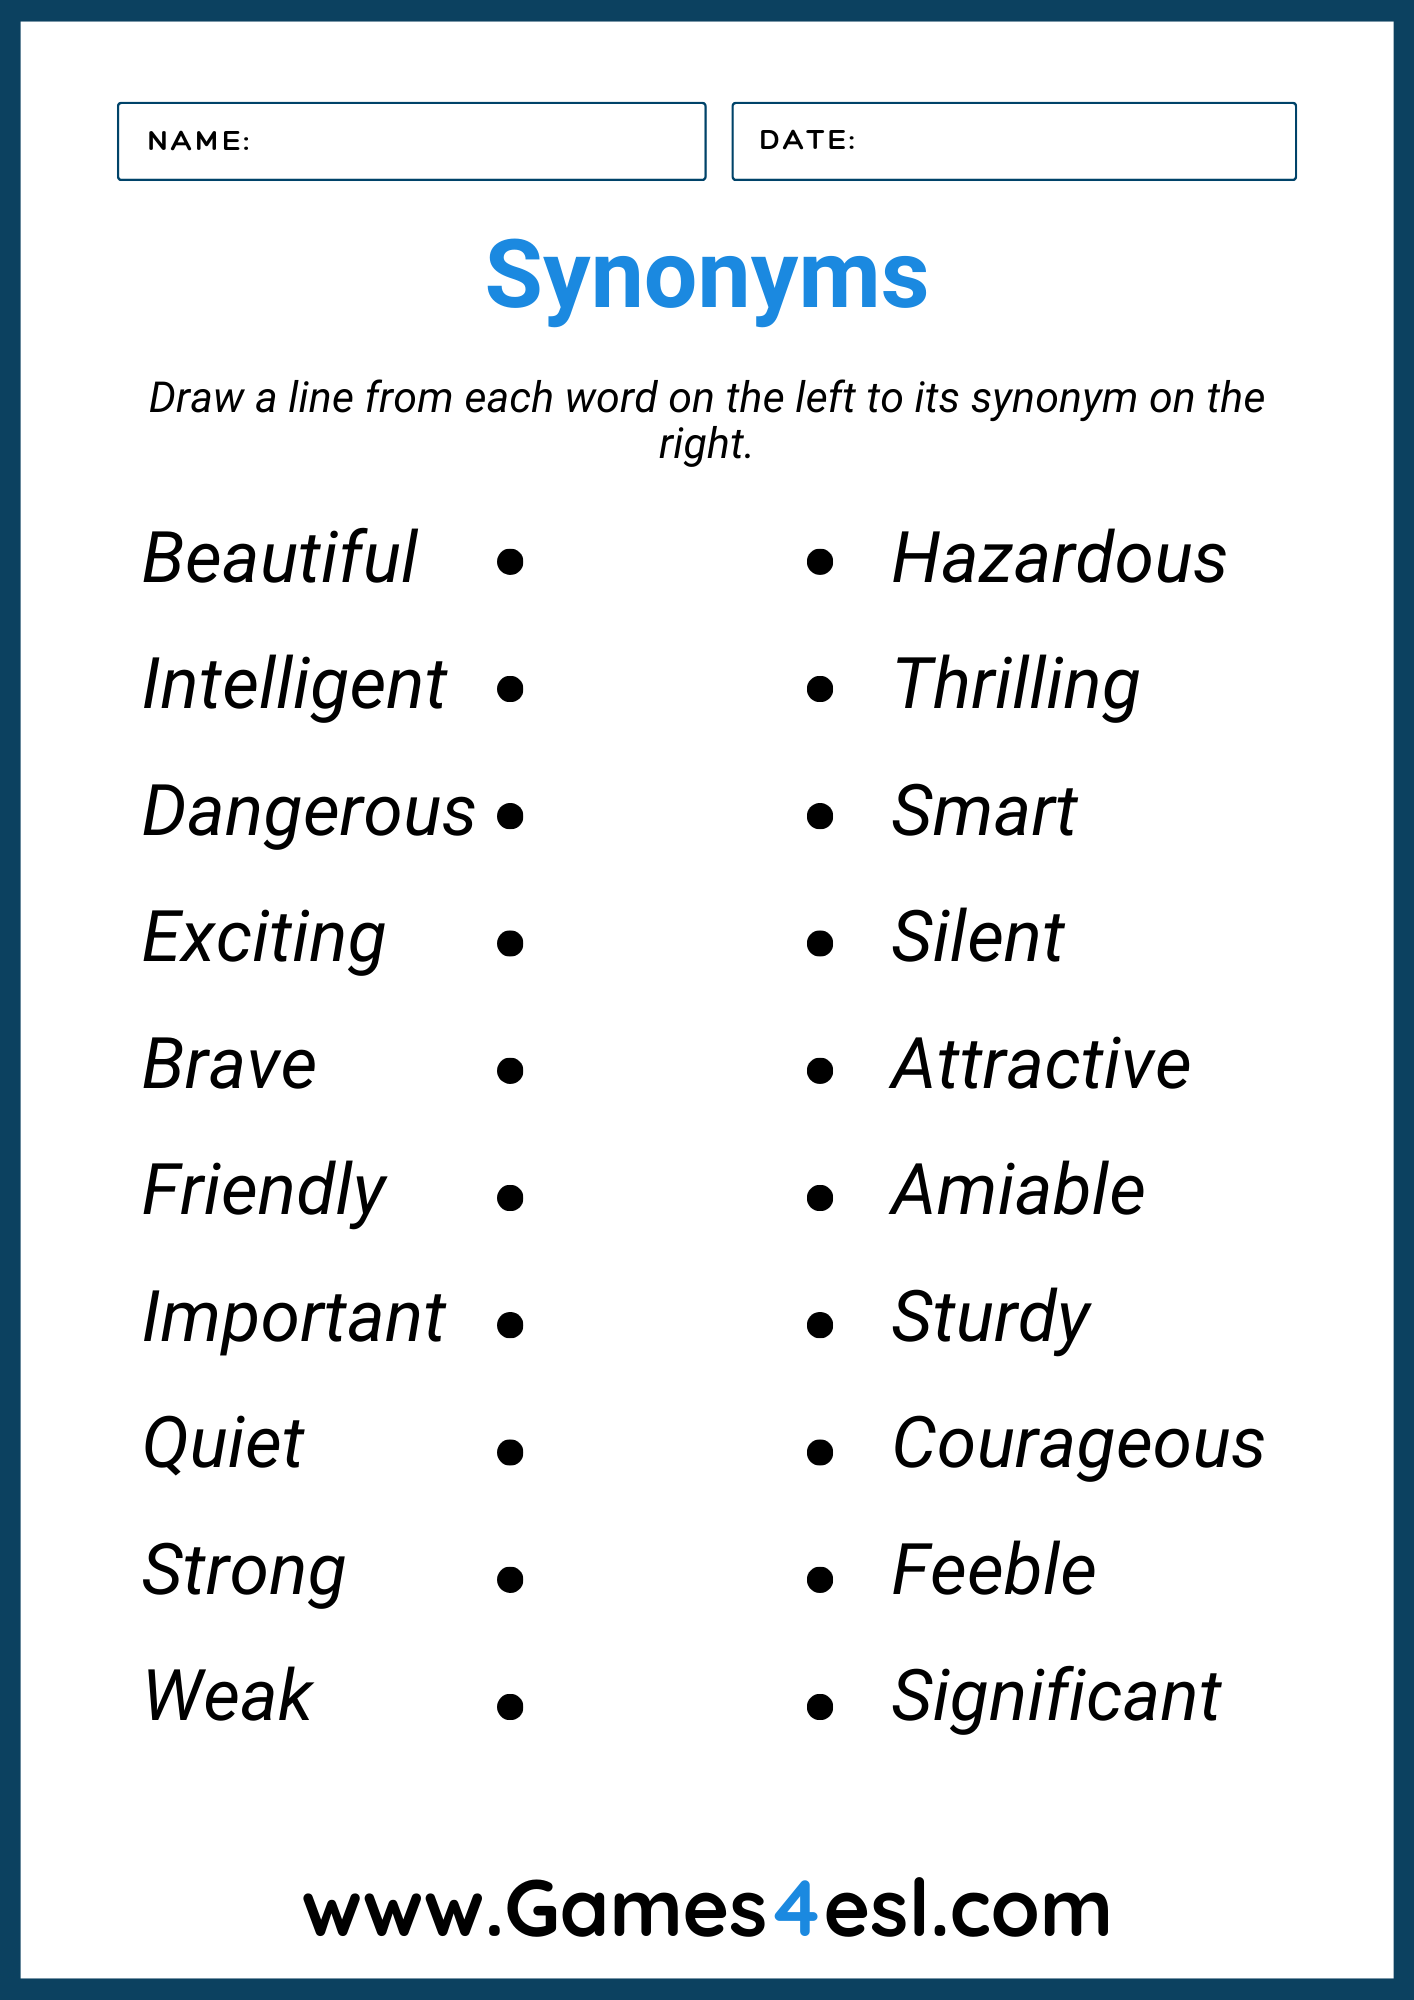 A worksheet that requires students to match the word to its synonym